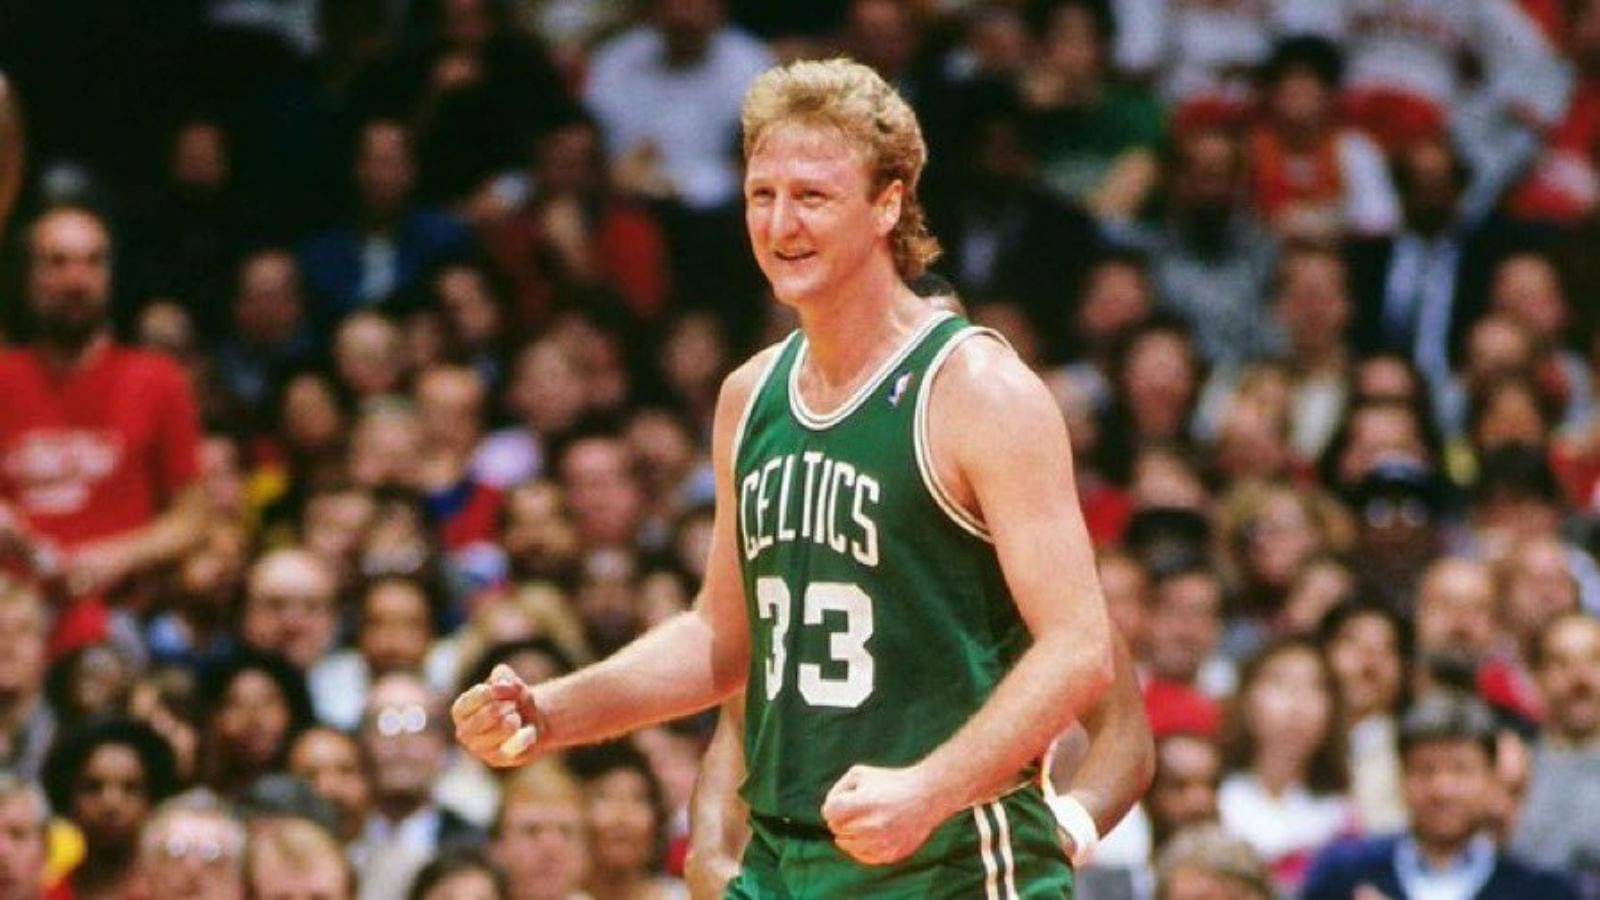 Larry Bird made a net worth of $75 million from a mere $24M career earnings because he didn't need supercars or fancy cloths to “Build His Ego” - The SportsRush